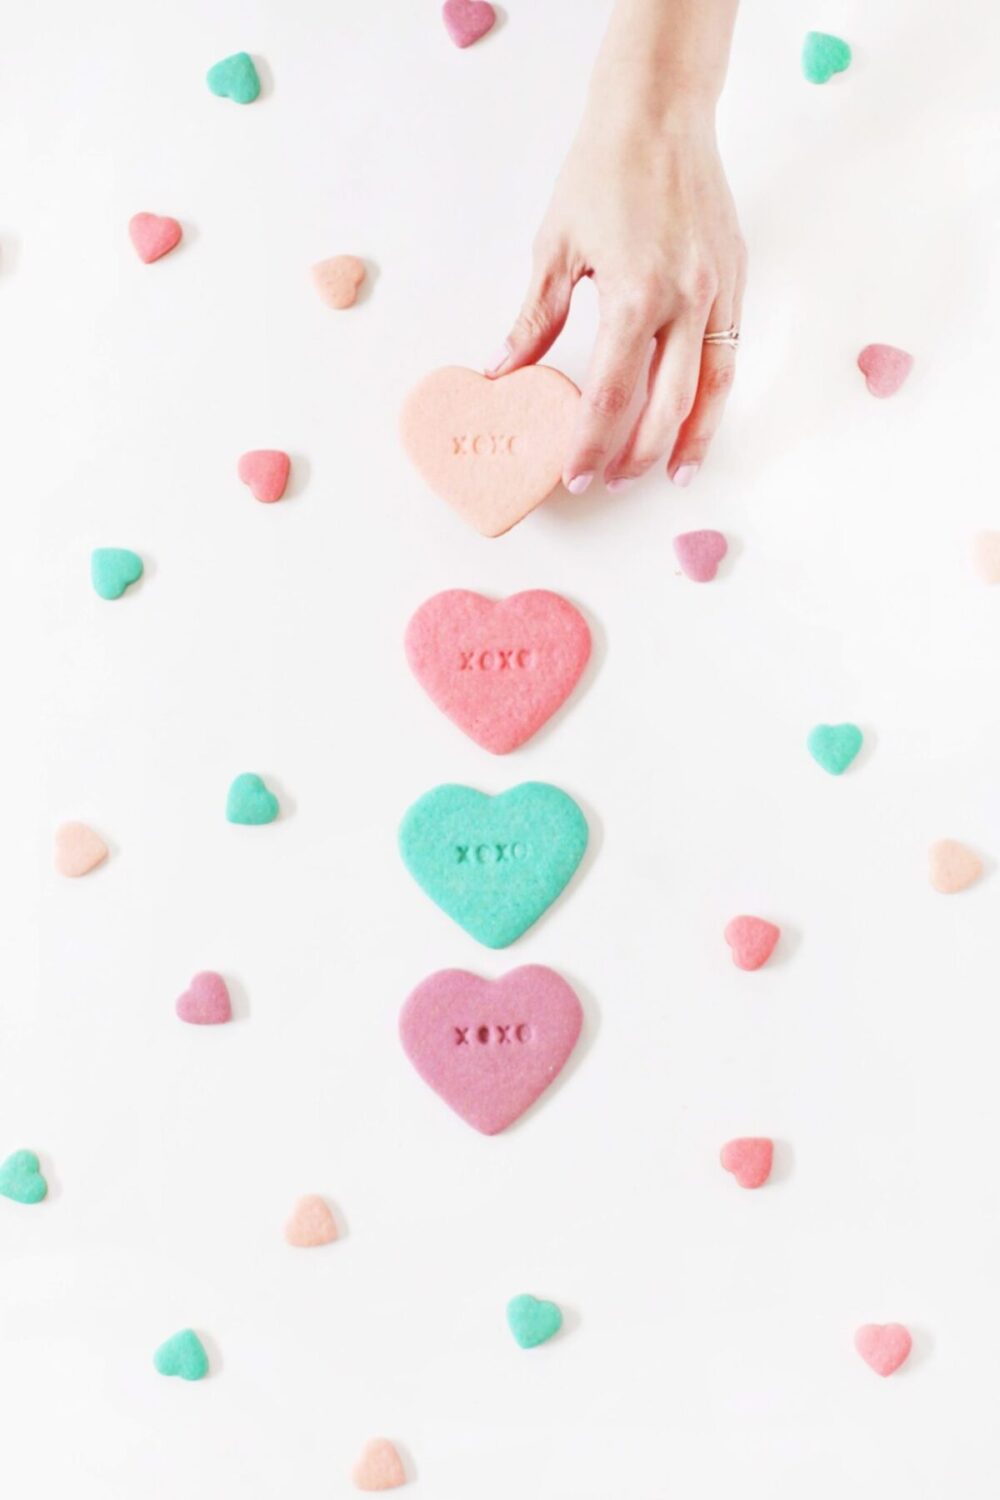 15 DIY Valentine's Day Gift Ideas for Your Significant Other